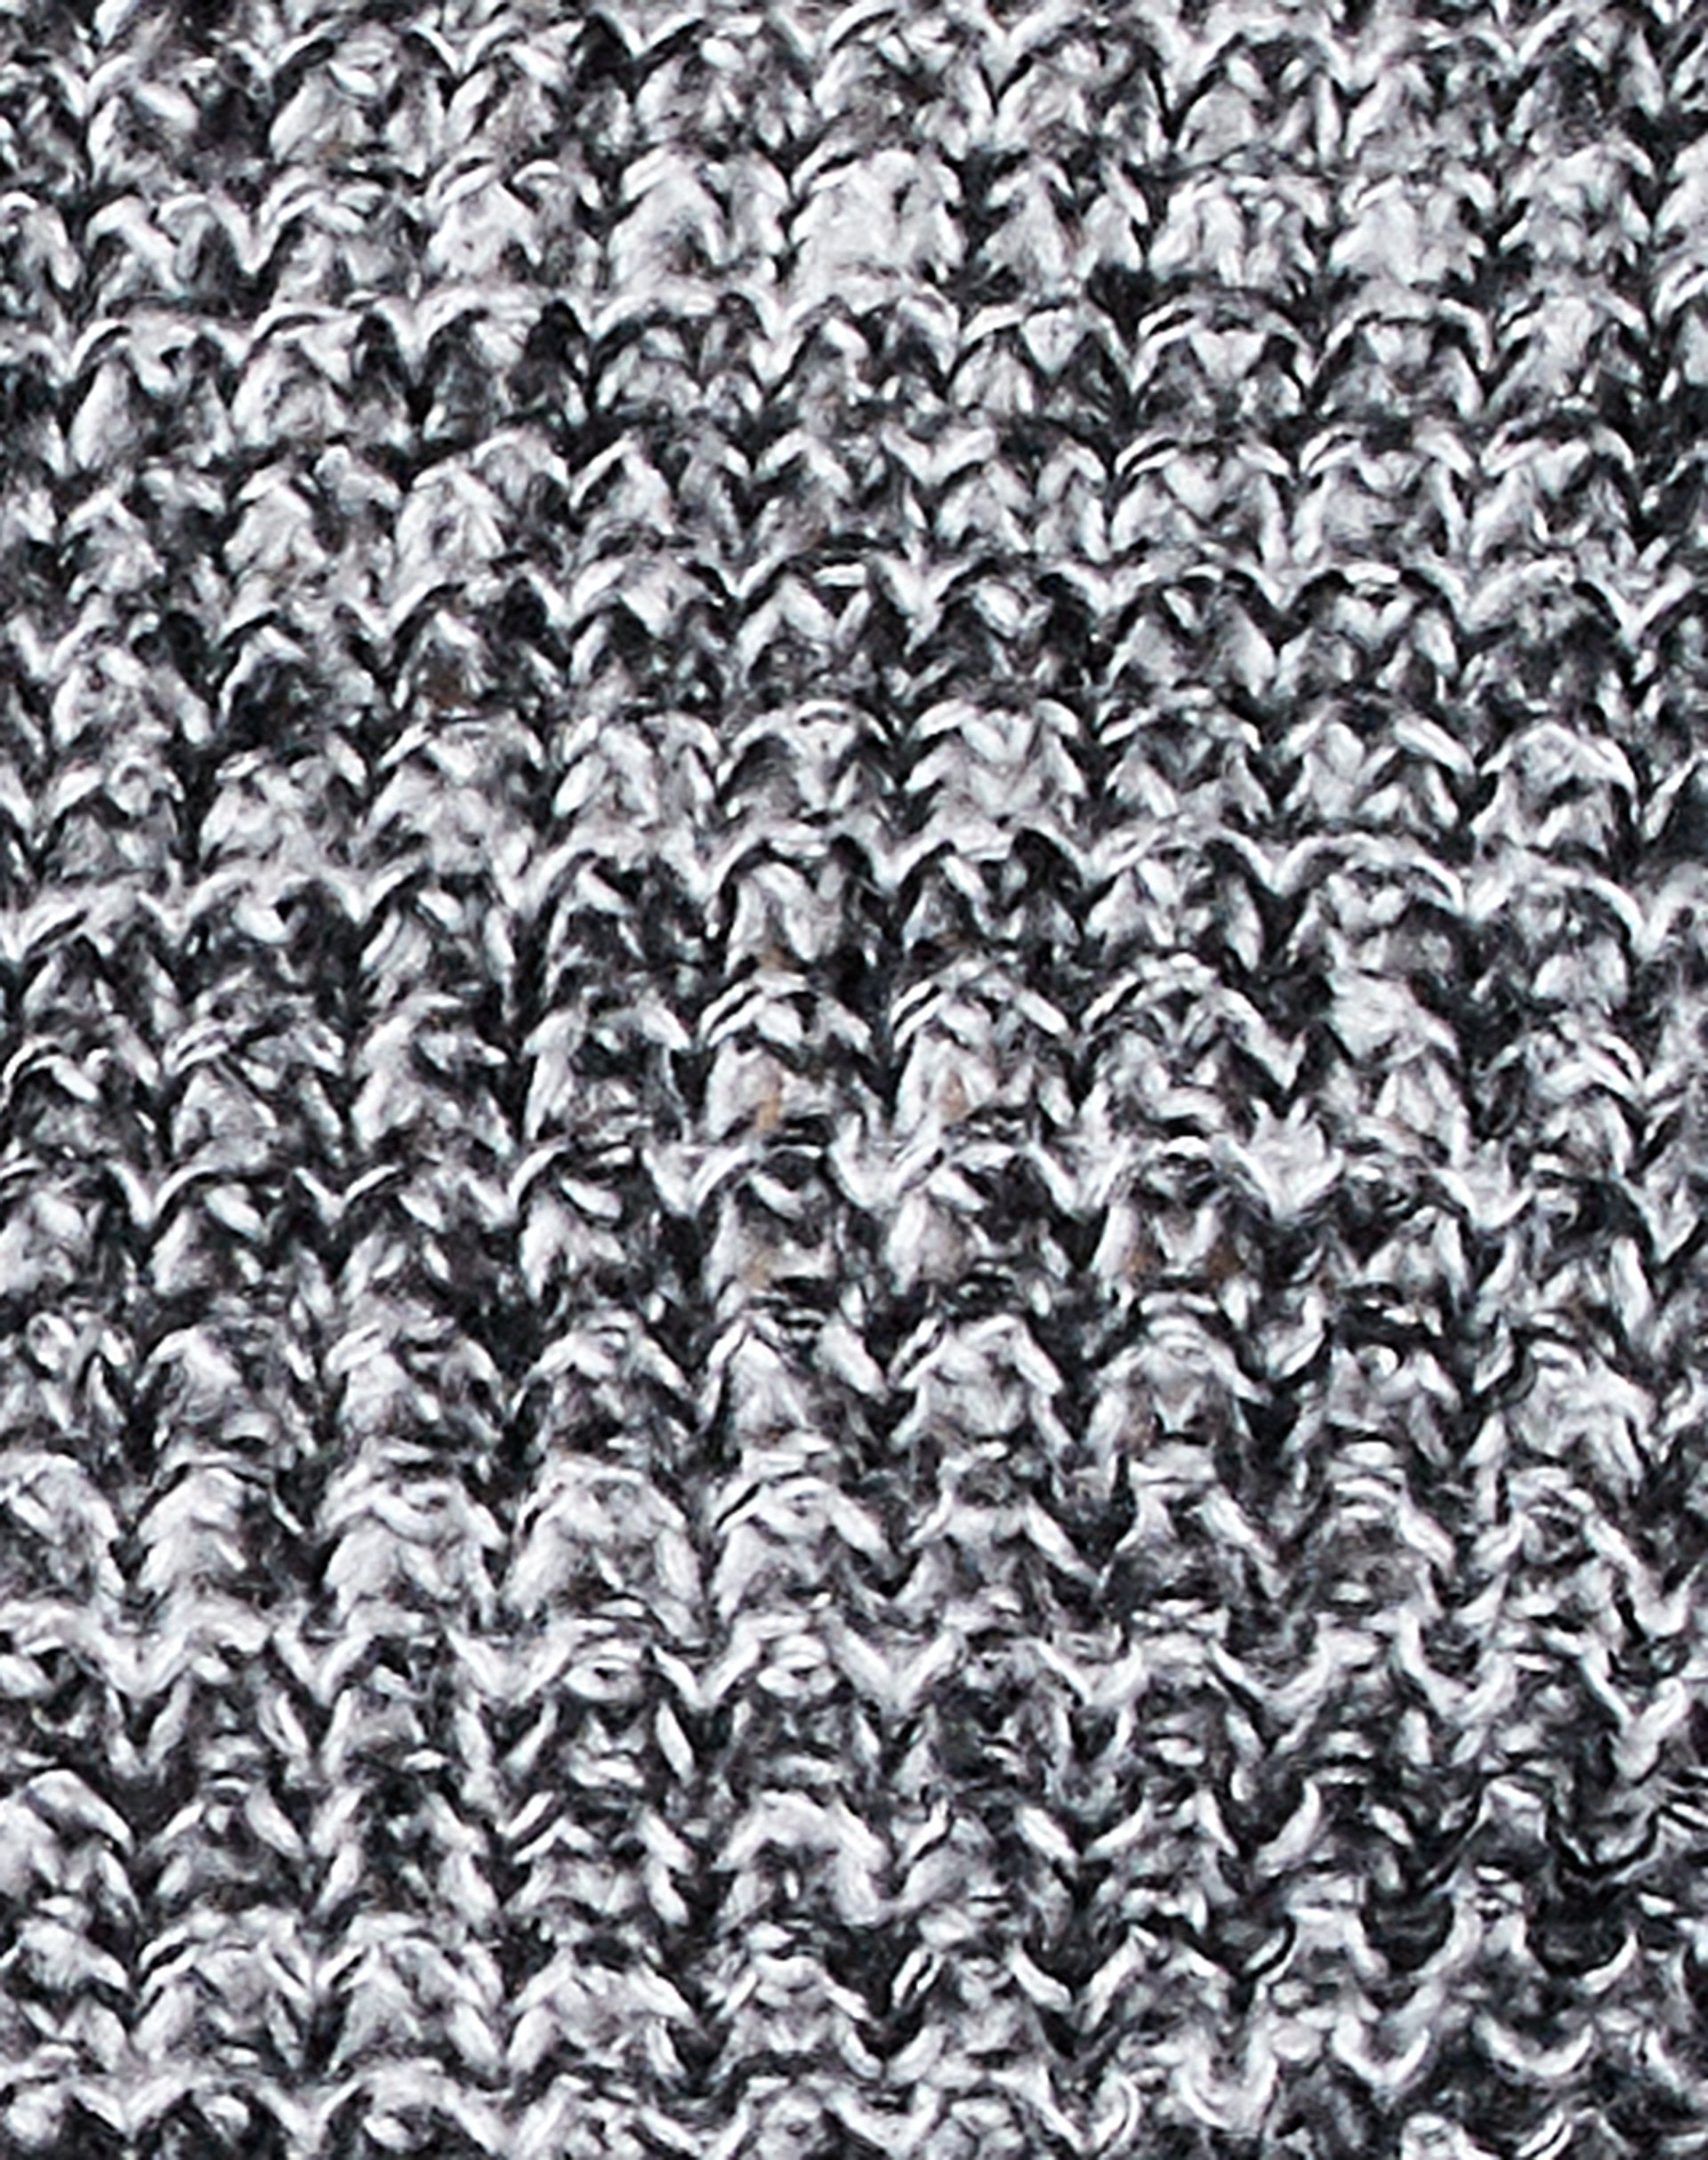 Caribou Jumper in Chunky Knit Black Grey and White